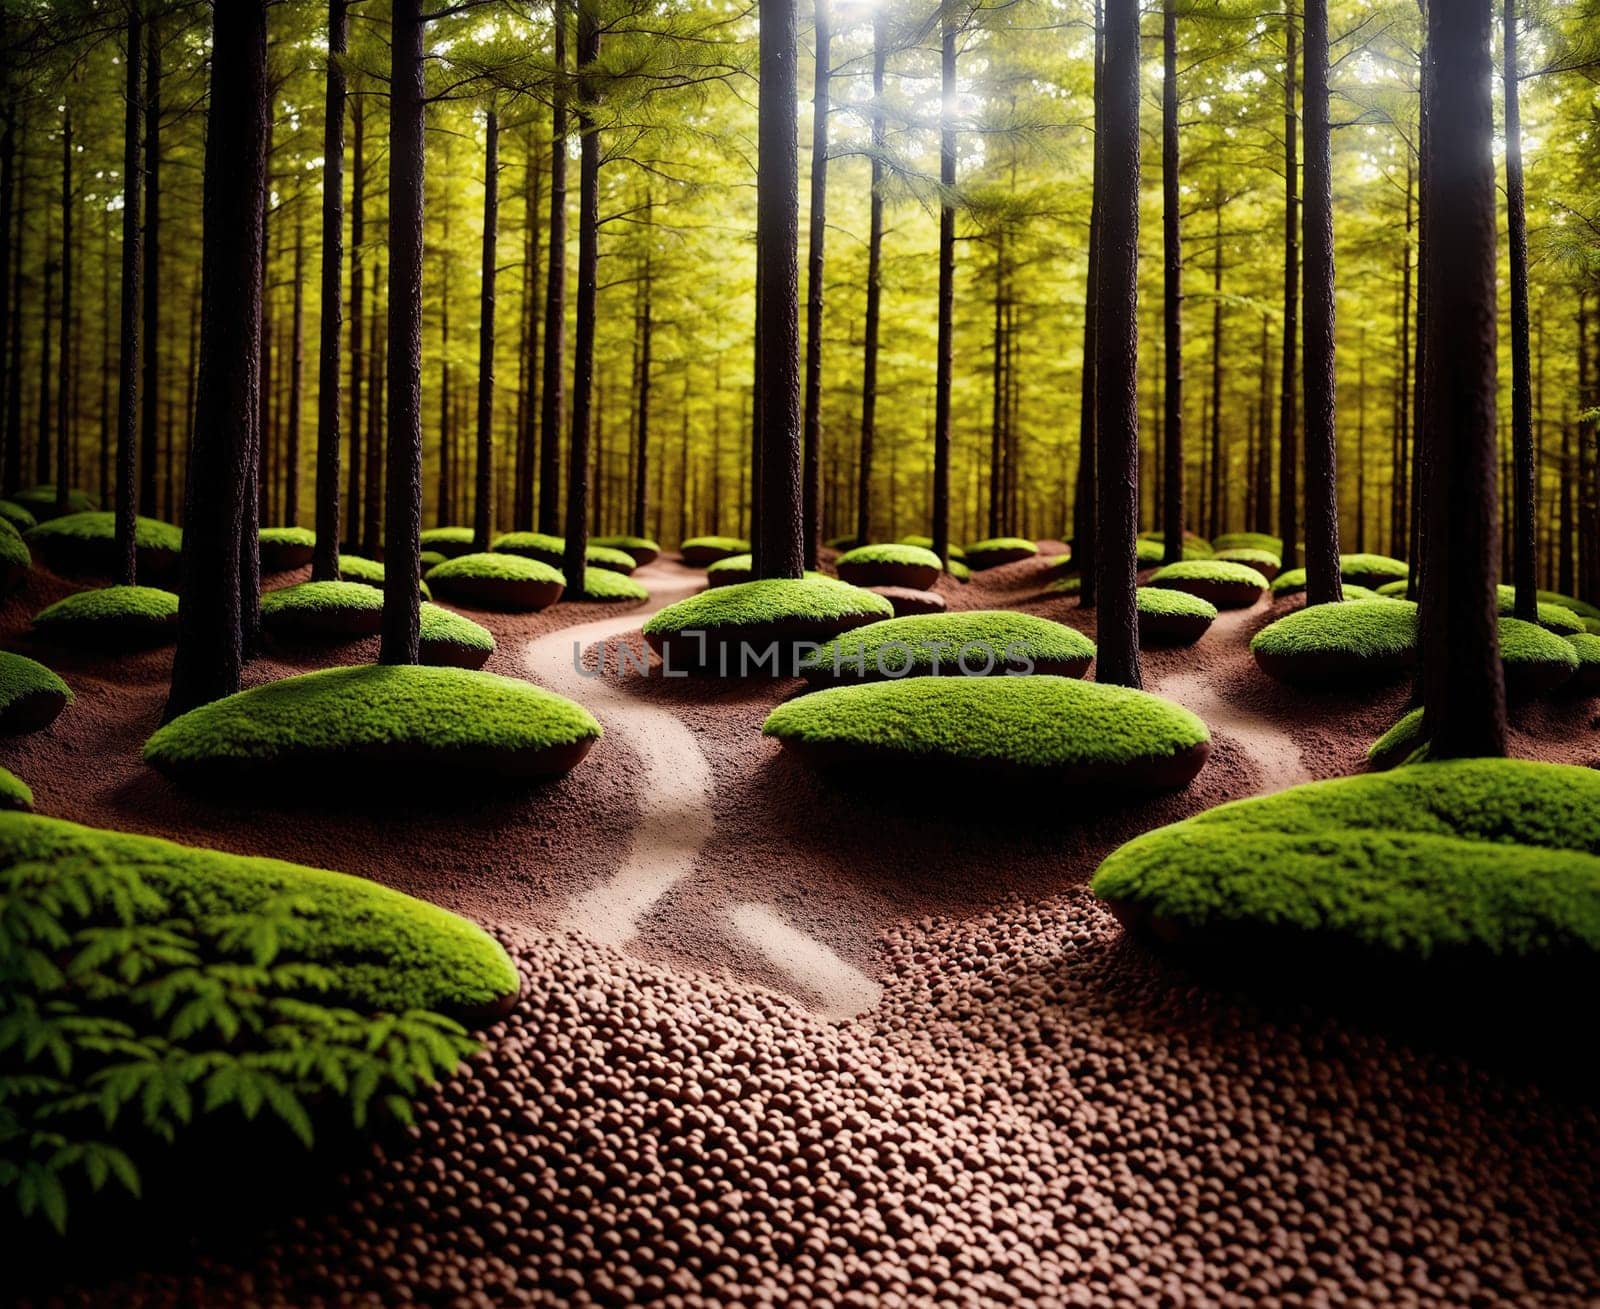 The image depicts a serene forest scene with moss-covered trees and a path leading through the woods.